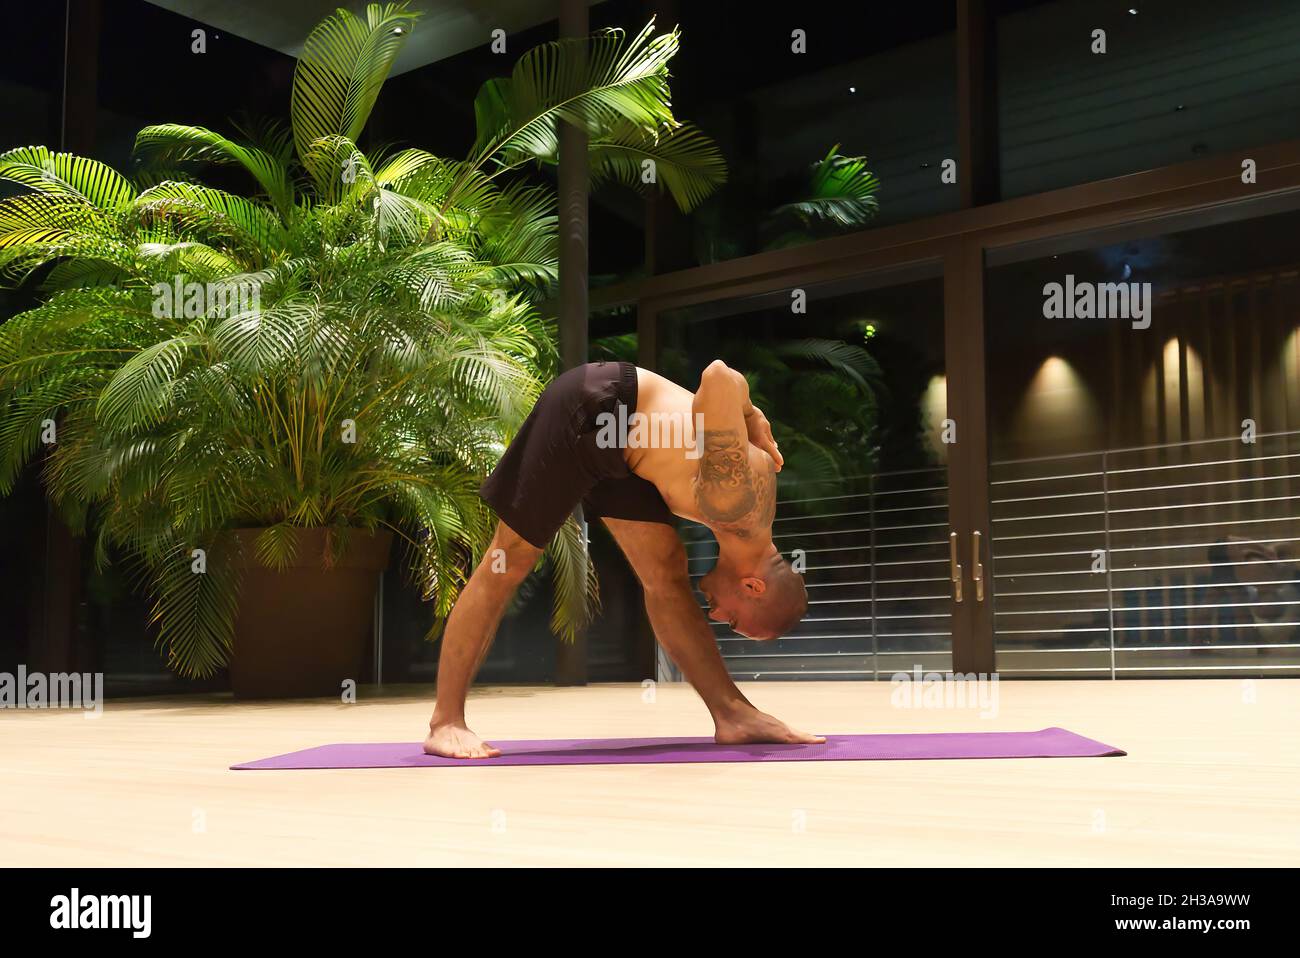 Middle aged handsome Caucasian male performs a yoga position indoors. Stock Photo